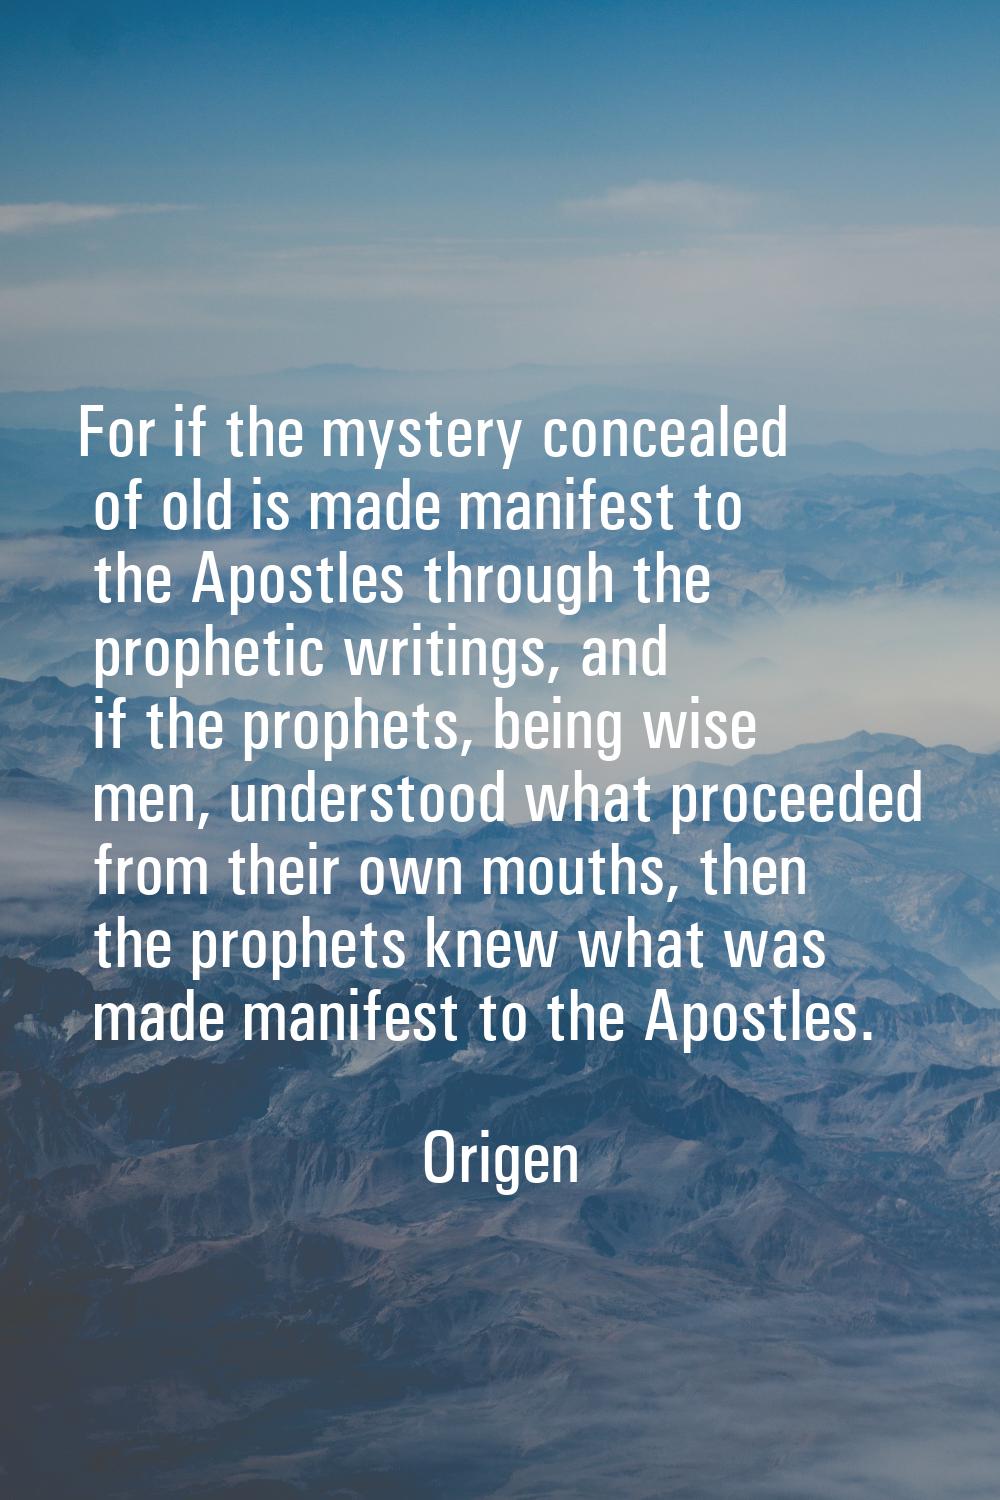 For if the mystery concealed of old is made manifest to the Apostles through the prophetic writings